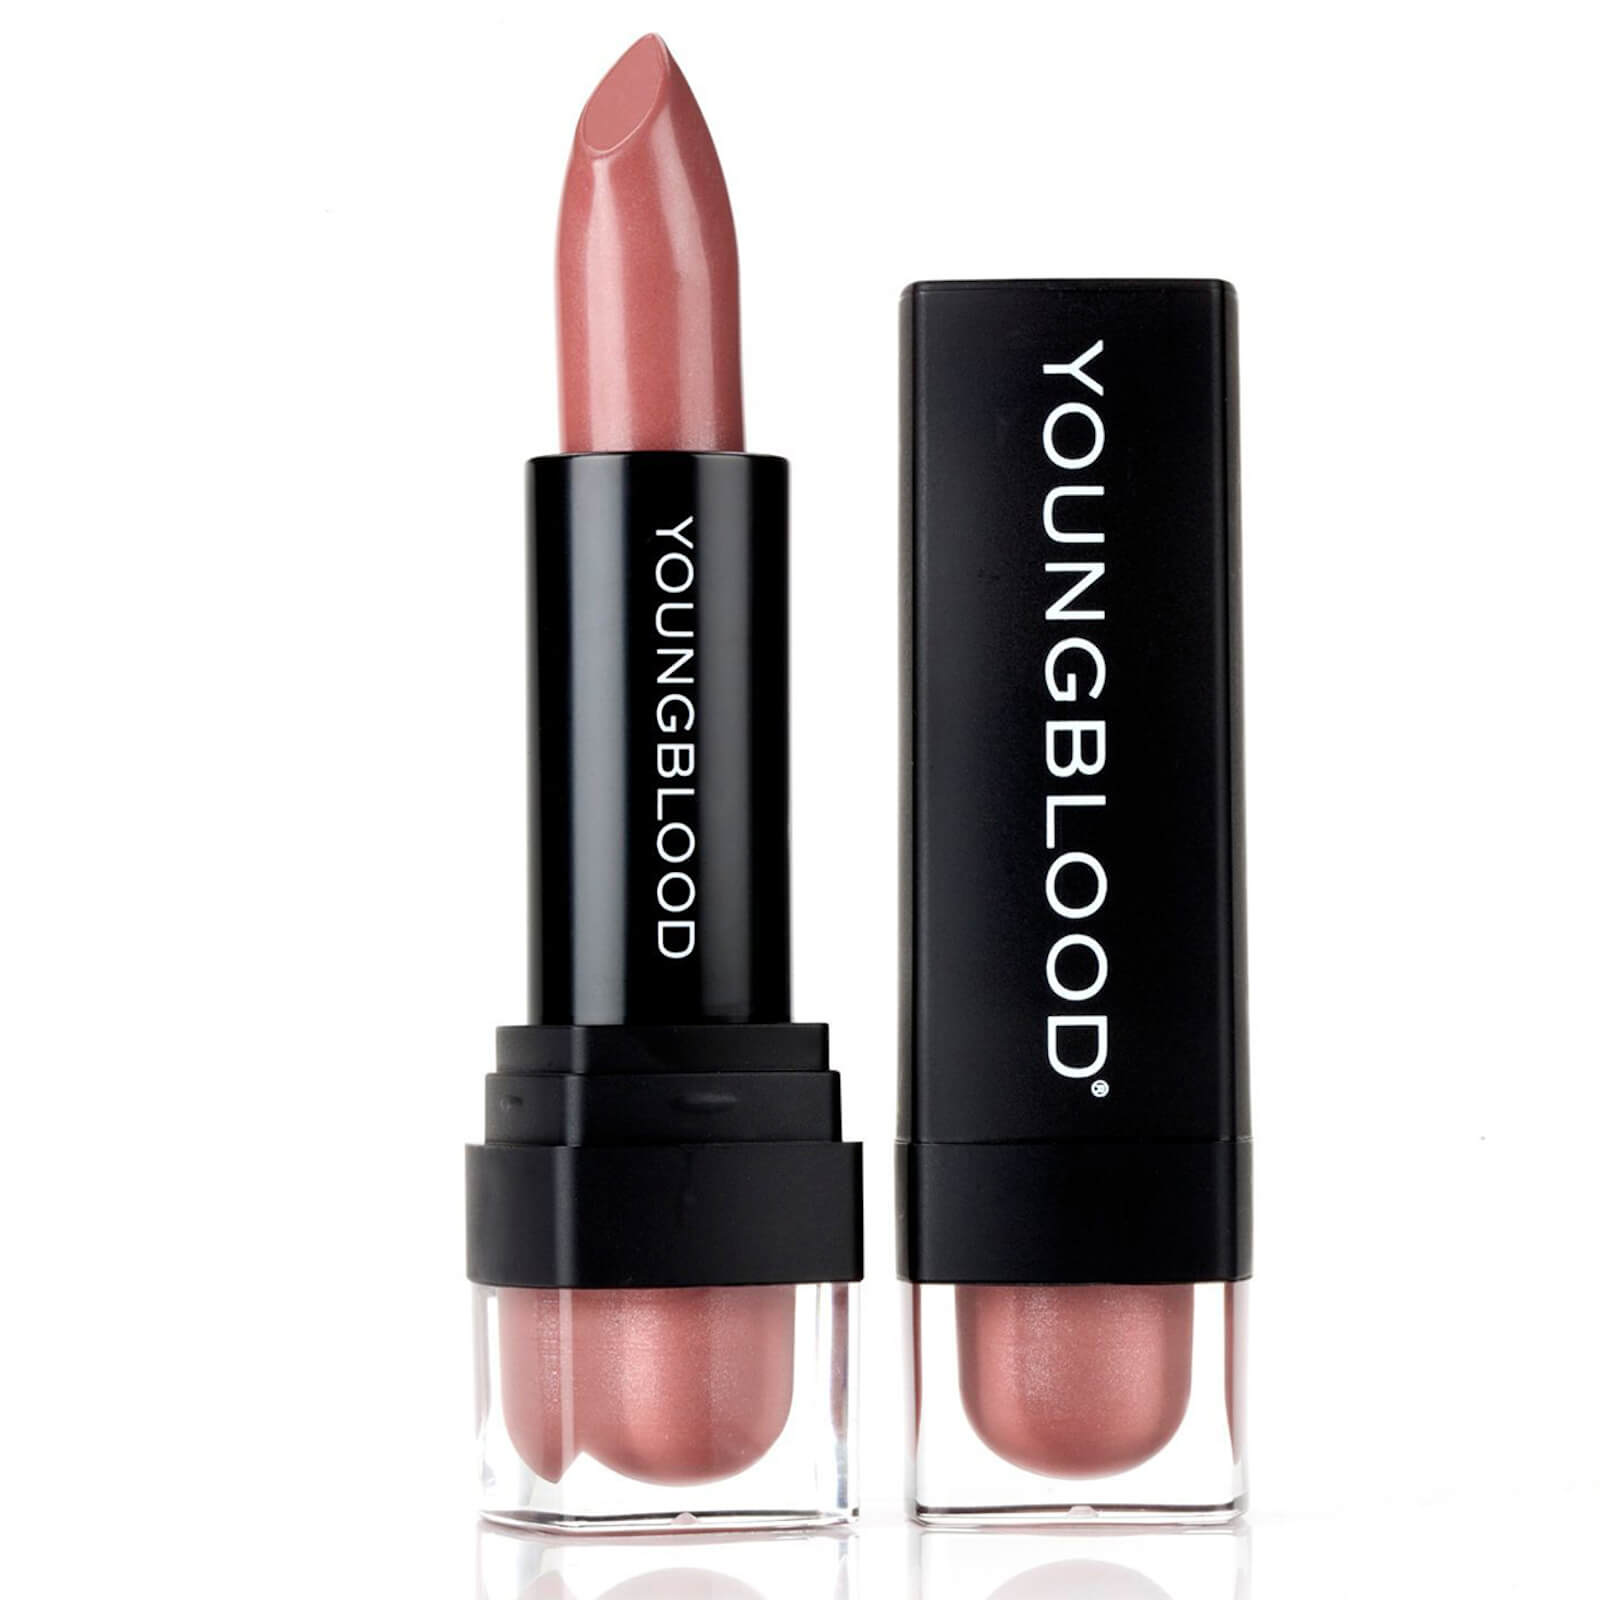 Youngblood Mineral Crème Lipstick 4g (Various Shades) - Blushing Nude